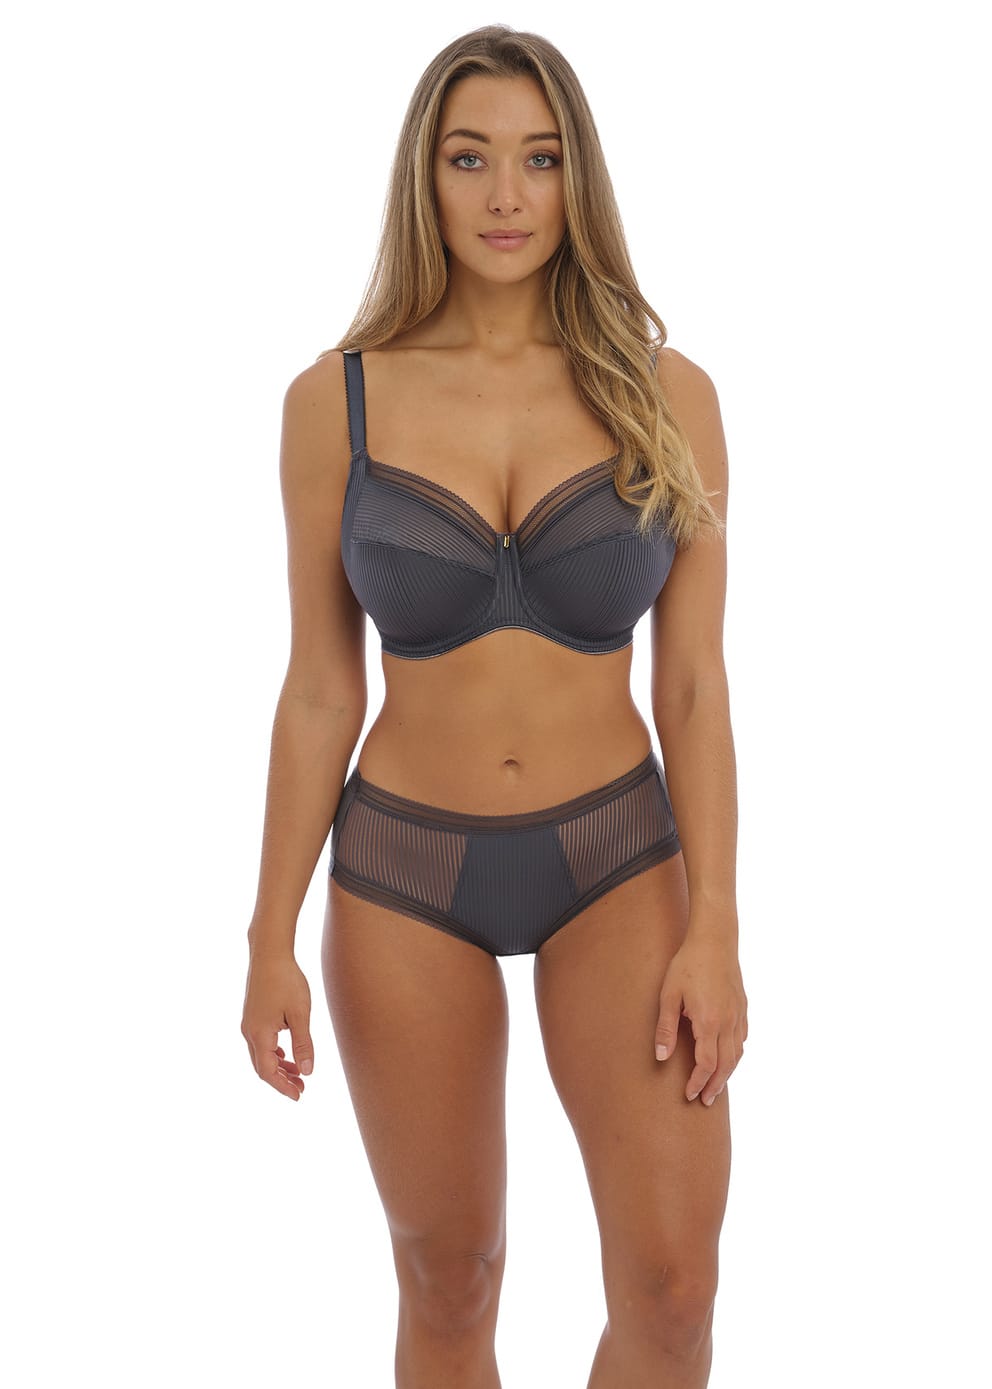 New Yet Timeless ~ Fantasie Fusion Lingerie Collection